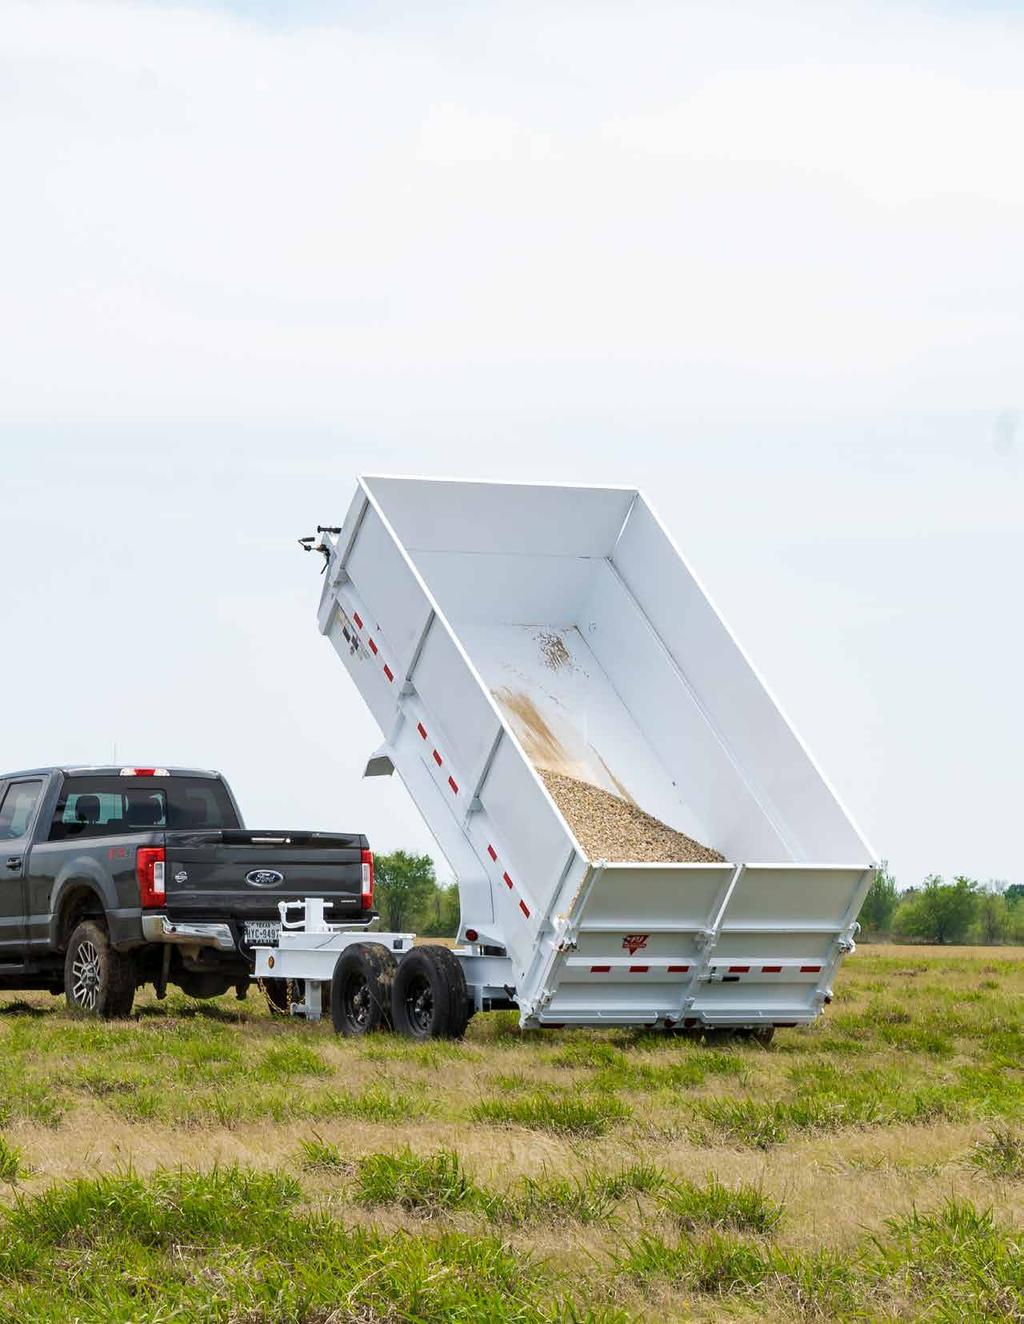 THE PROFESSIONAL GRADE STANDARD PJ Trailers is the industry leader when it comes to combining product quality, support, and level of personal customization.